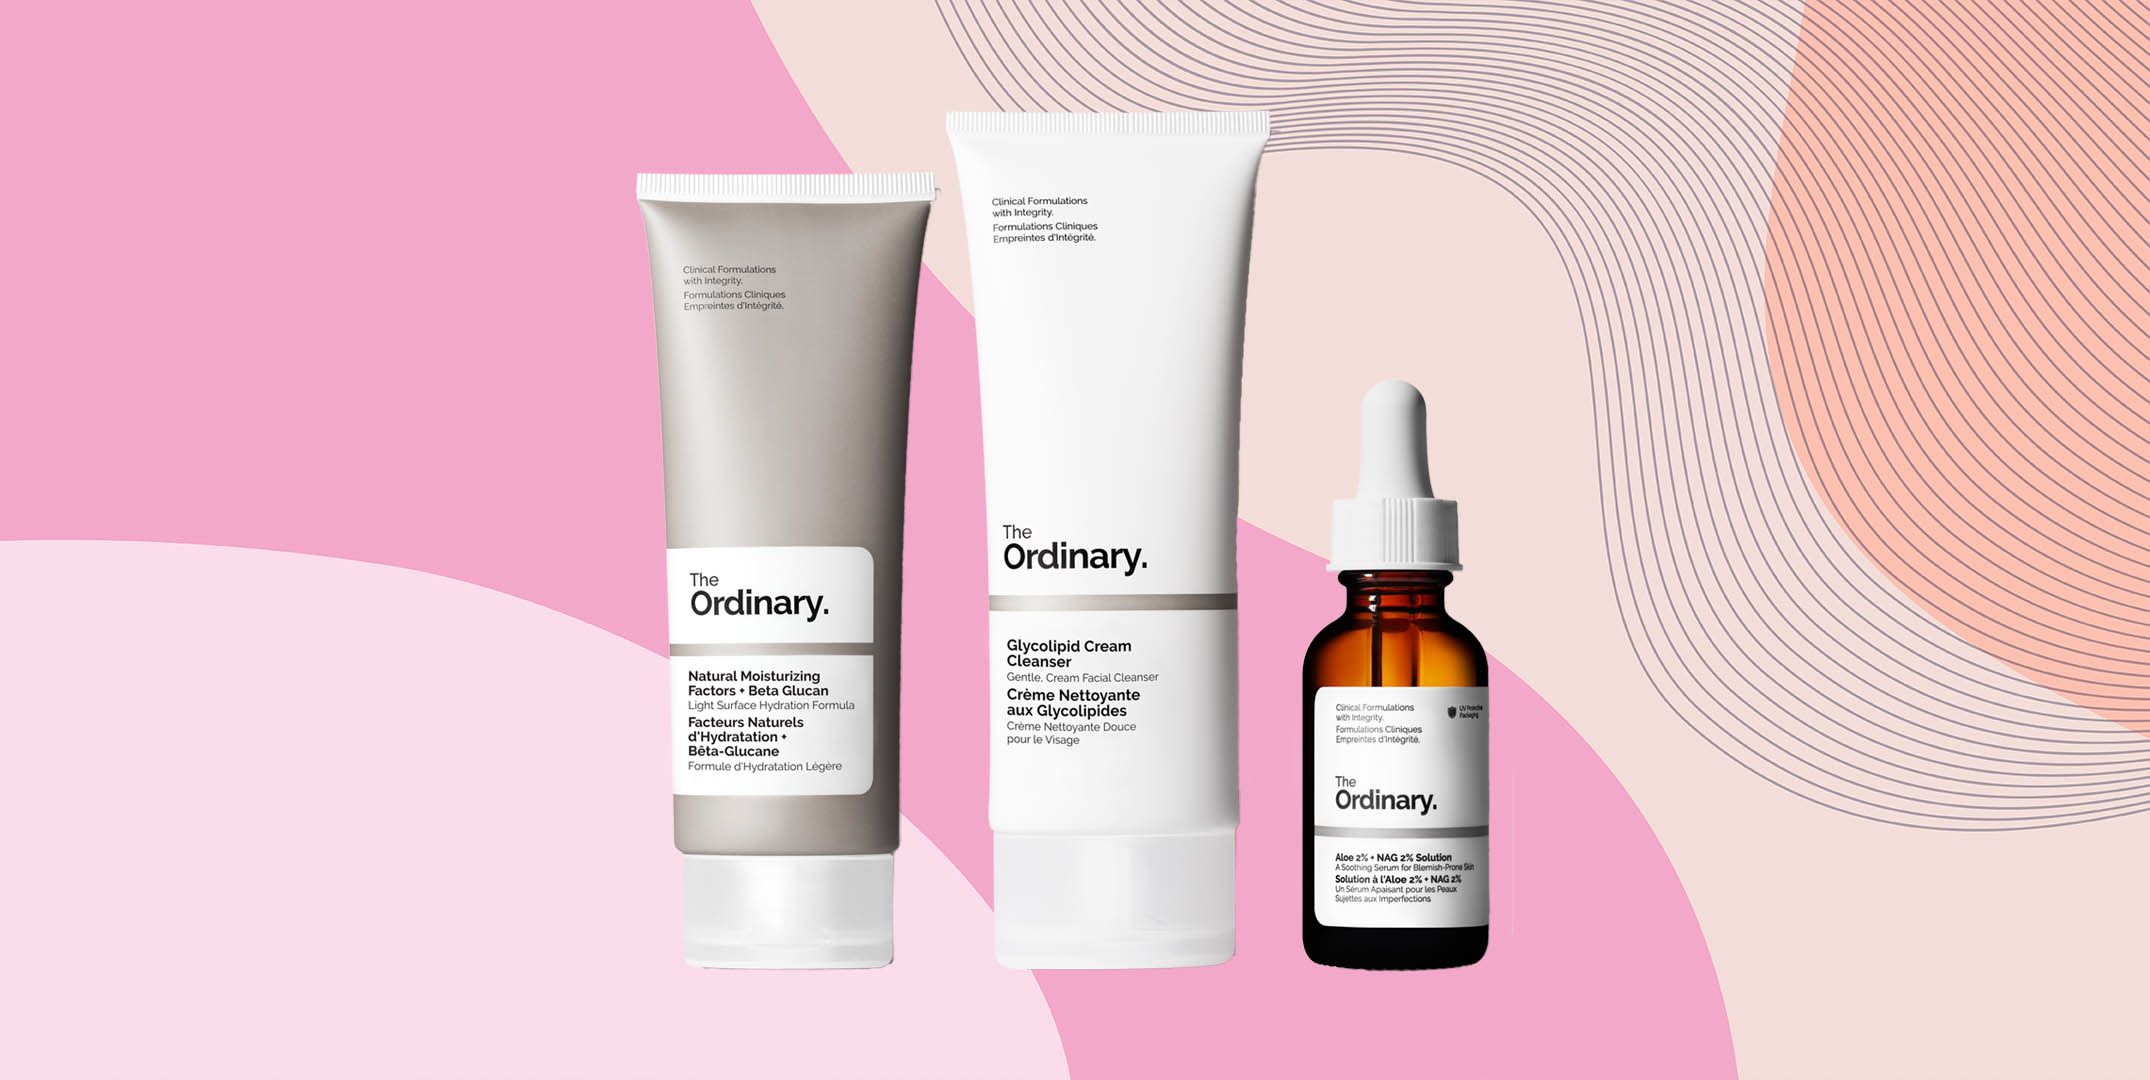 The Best Anti-Aging Skincare Routine That's Simple and Effective